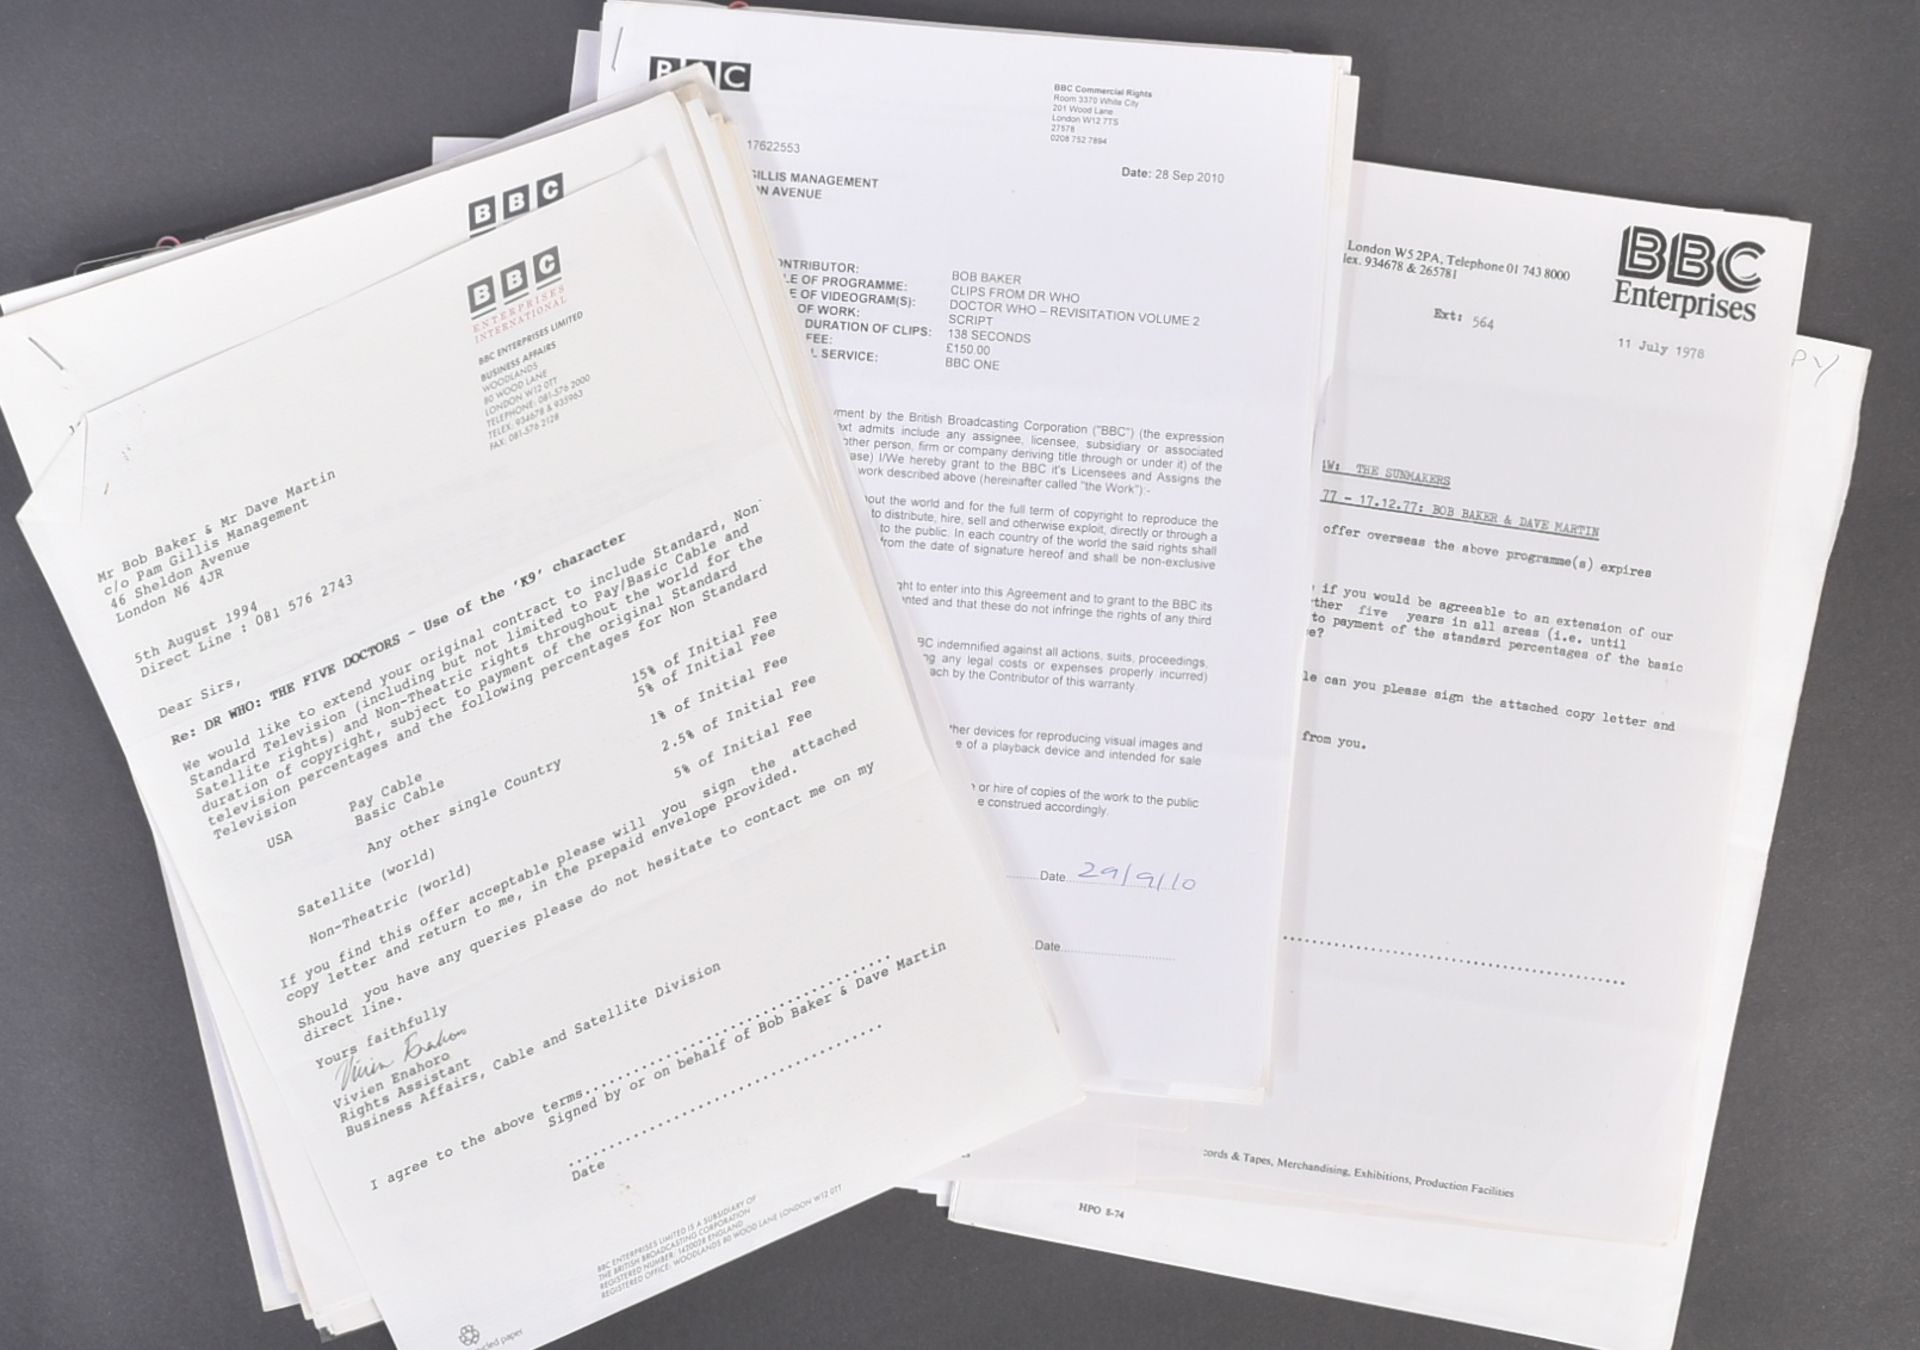 ESTATE OF BOB BAKER - DOCTOR WHO - CONTRACTS